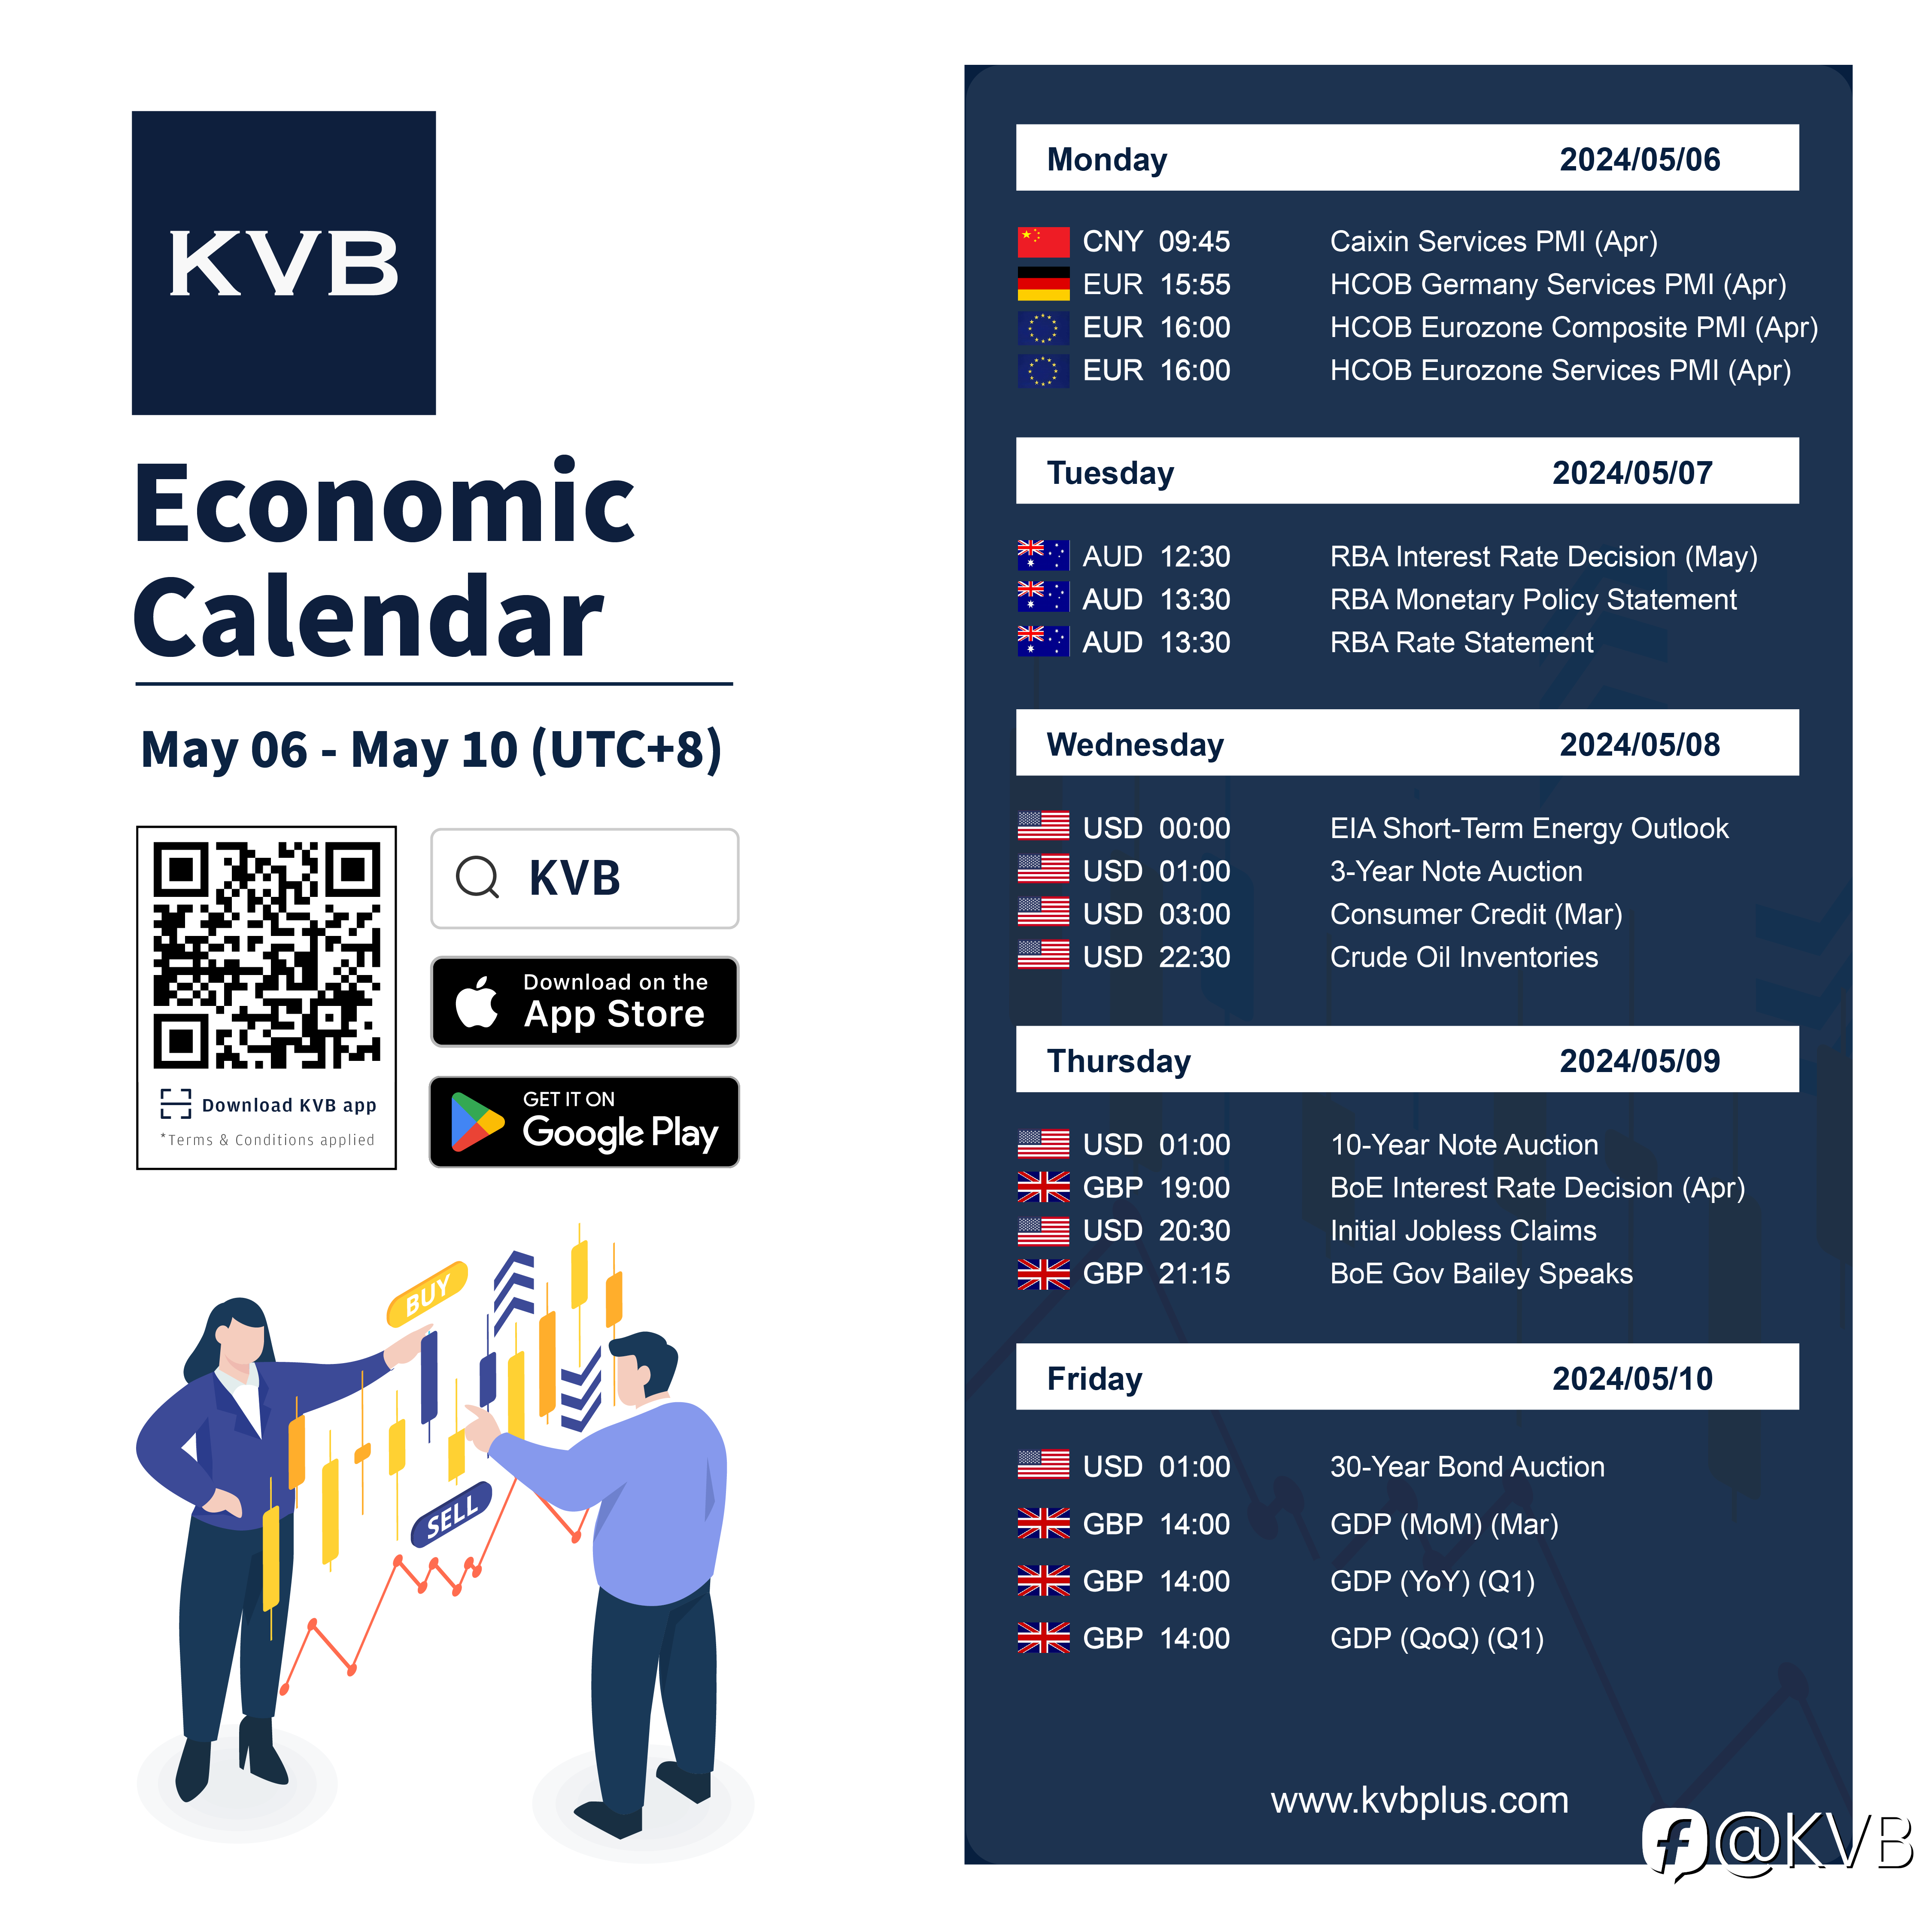 What economic events should you keep an eye on this week? 🤔